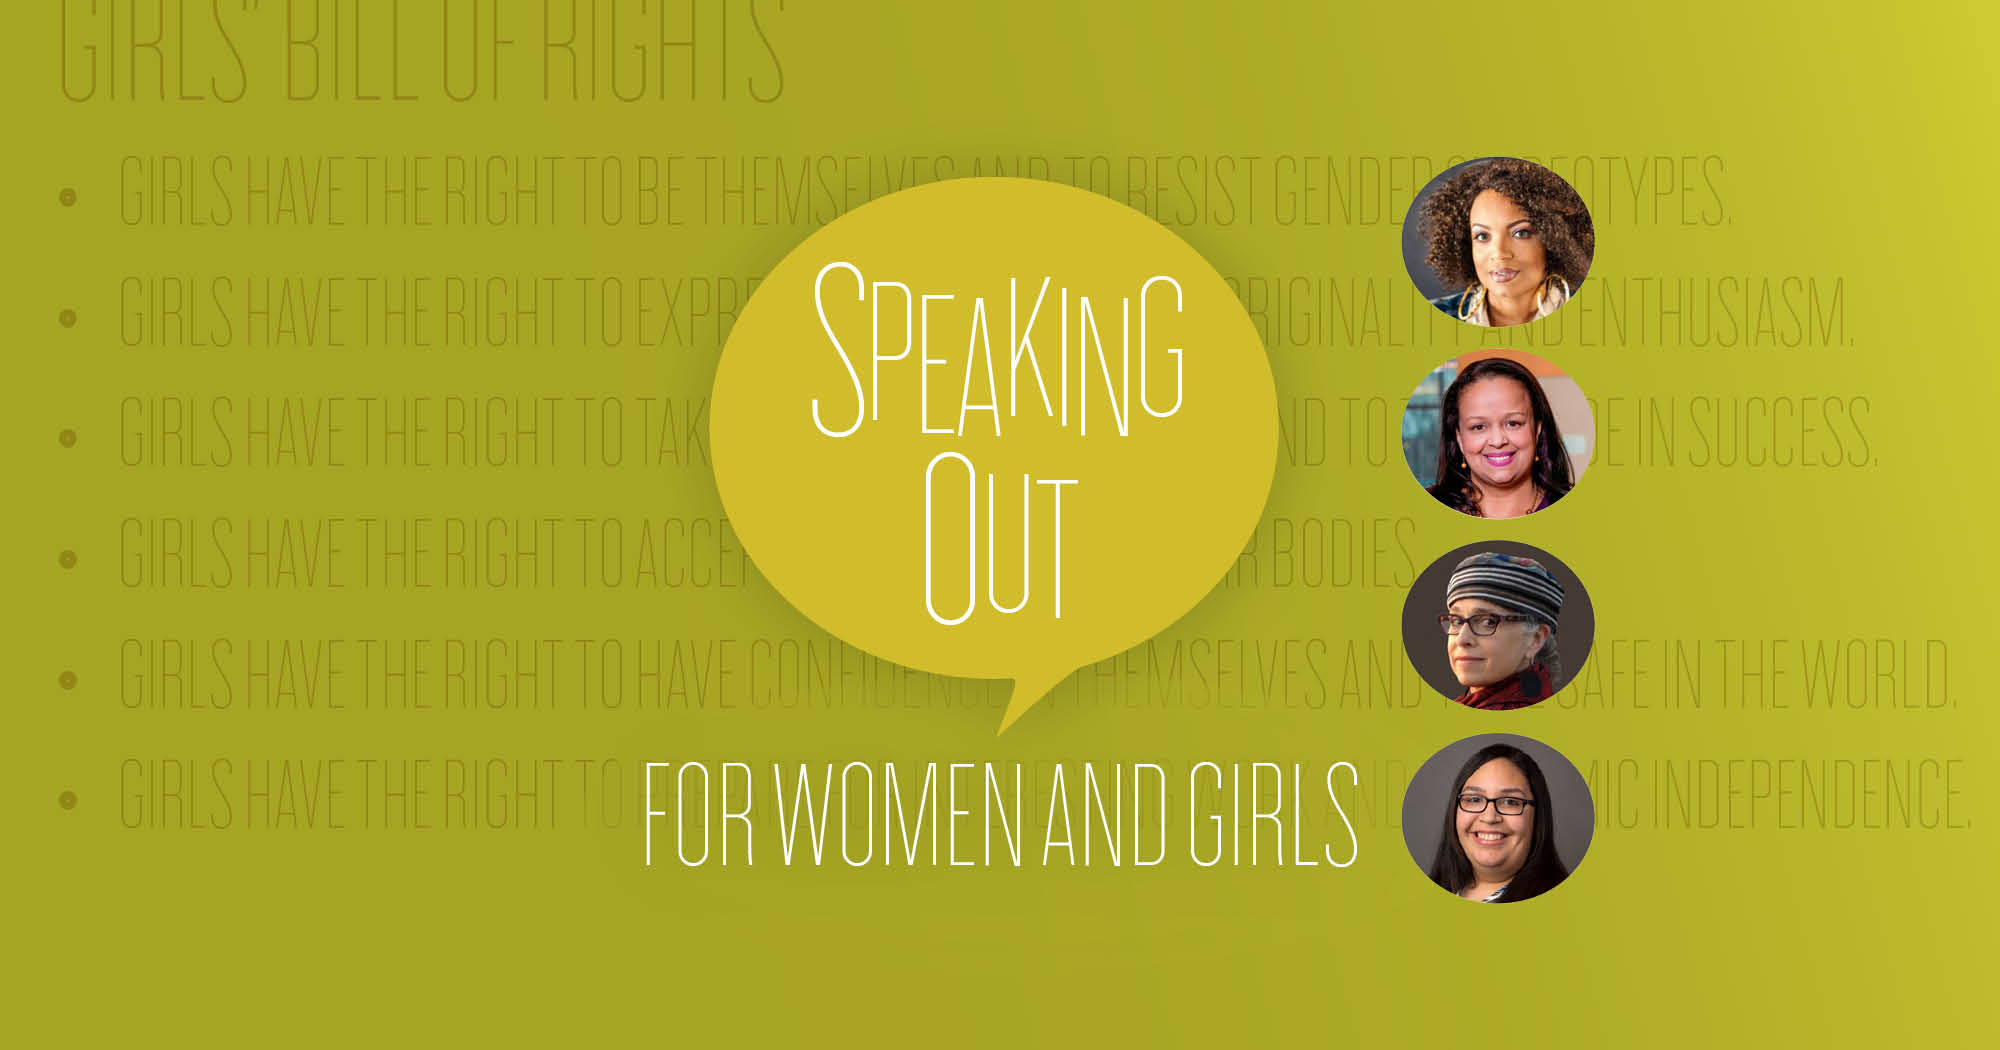 #GirlsToo inspires speaking out